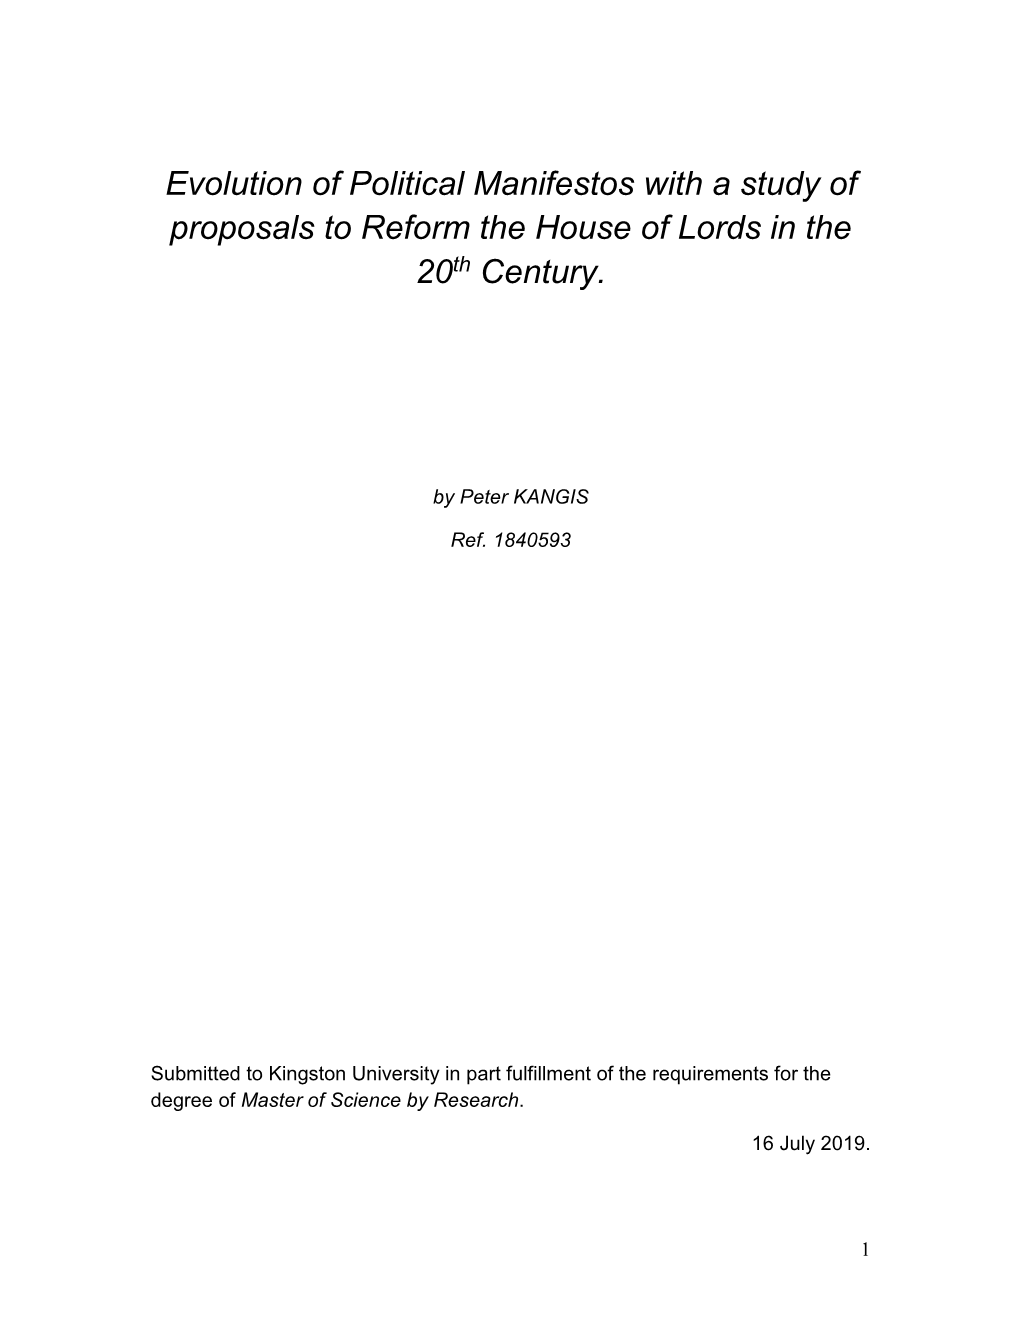 Evolution of Political Manifestos with a Study of Proposals to Reform the House of Lords in the 20Th Century